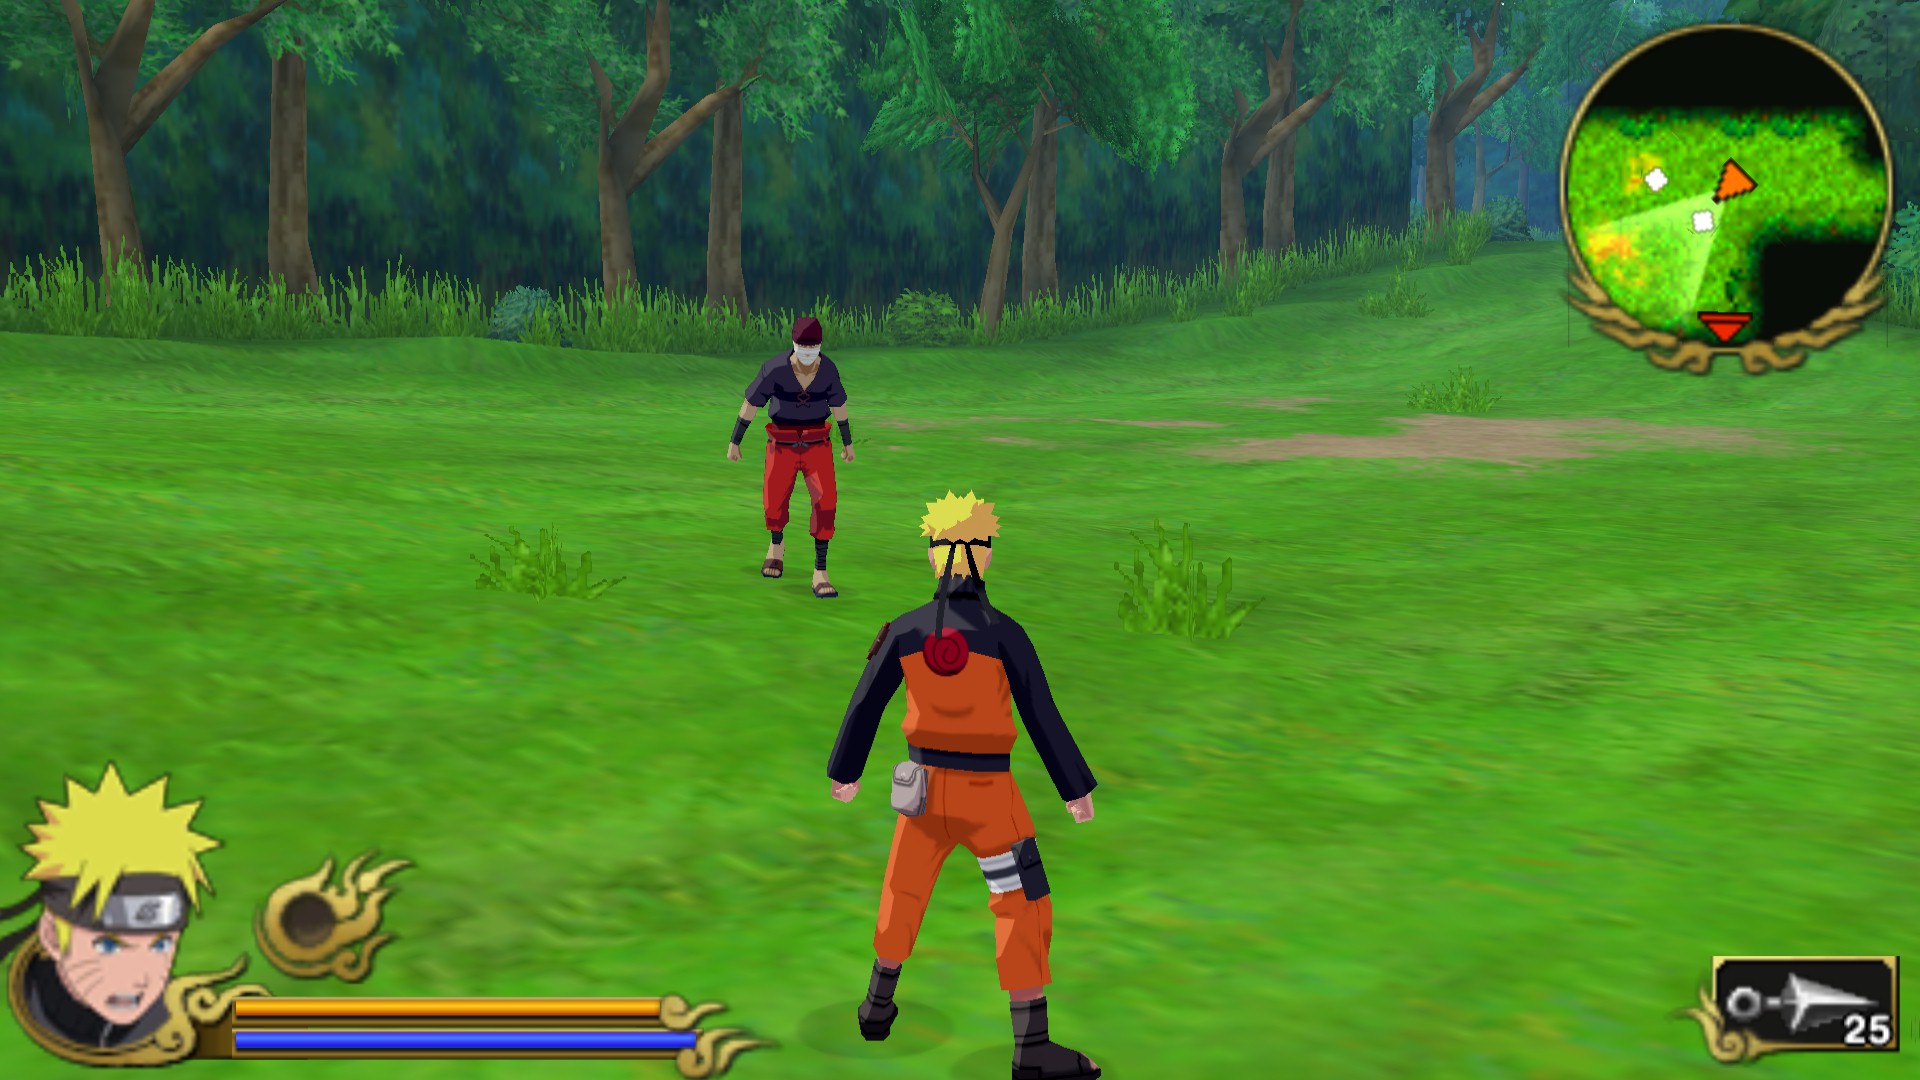 Download naruto ppsspp cso